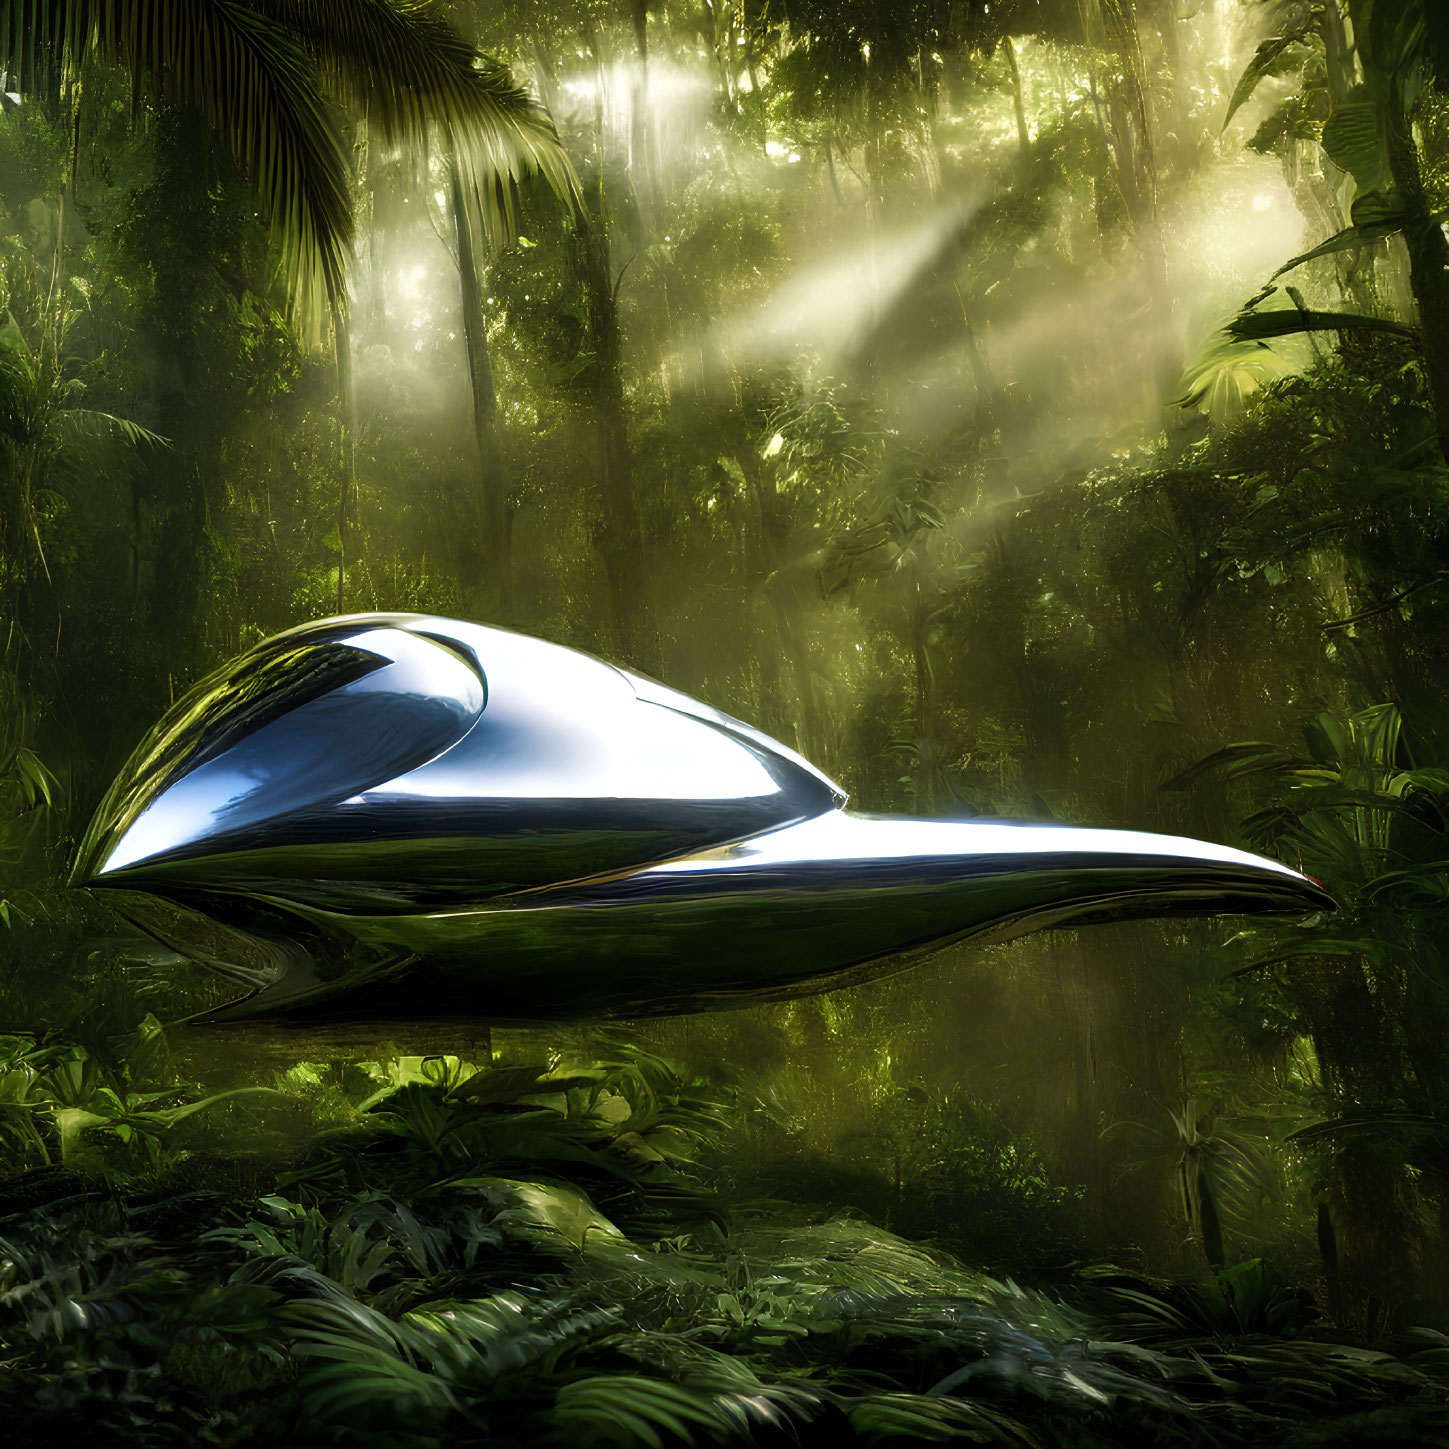 Futuristic hovering vehicle in misty jungle with sunlight rays